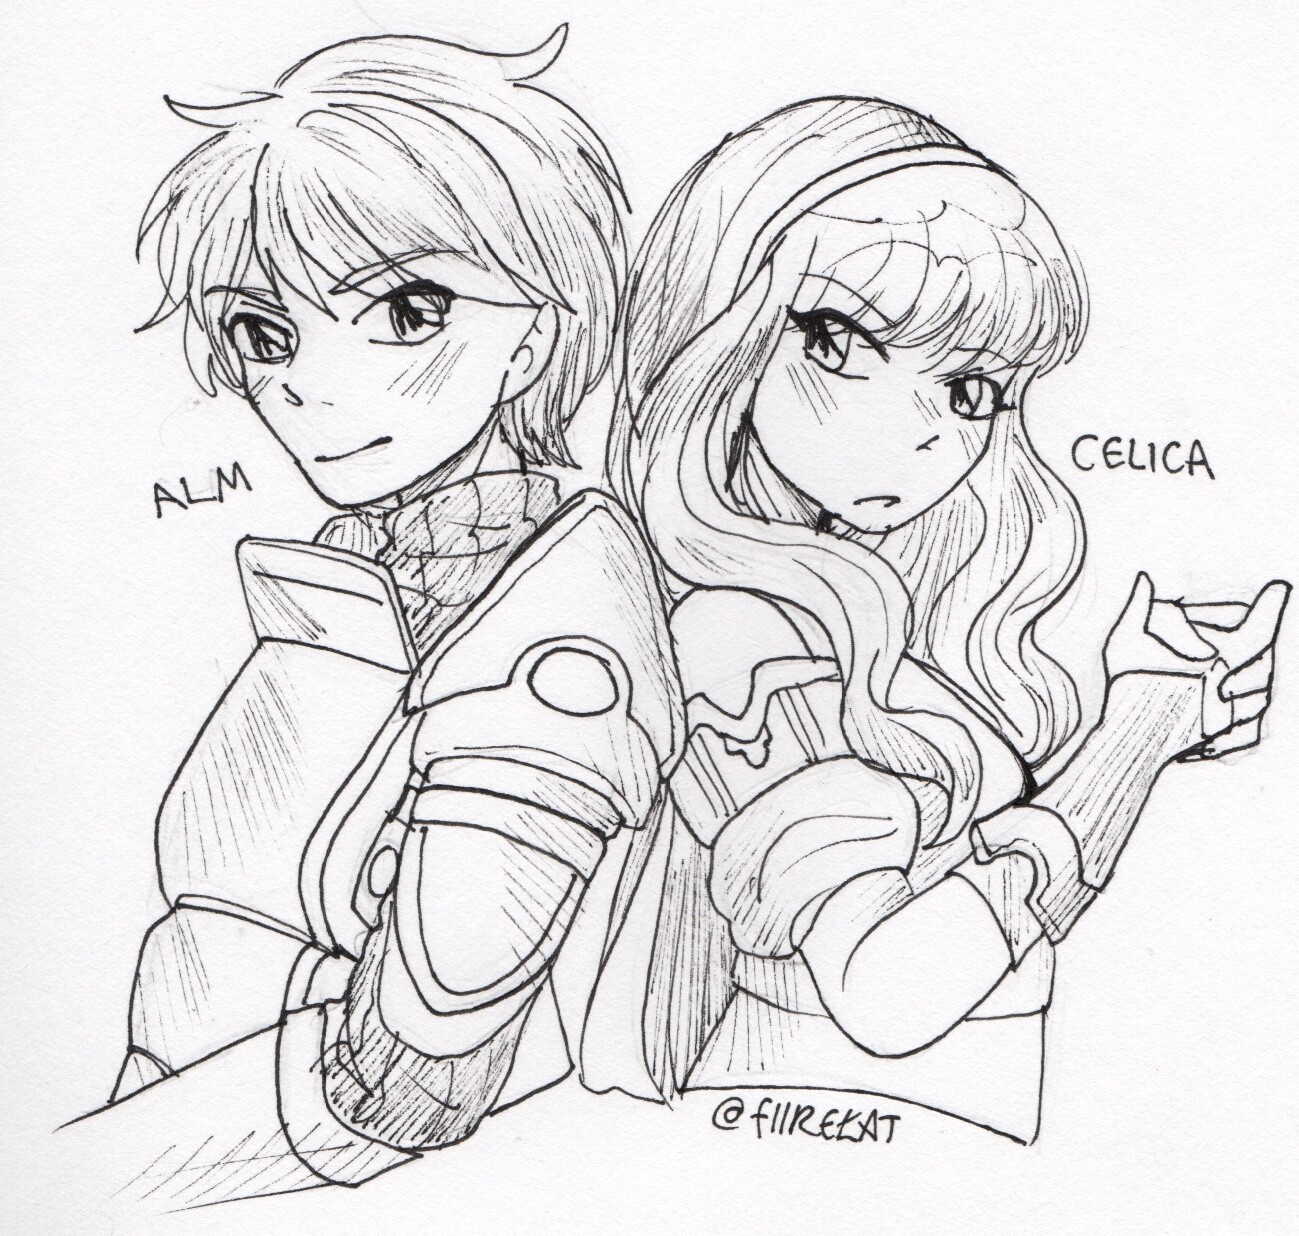 ArtStation - Alm and Celica